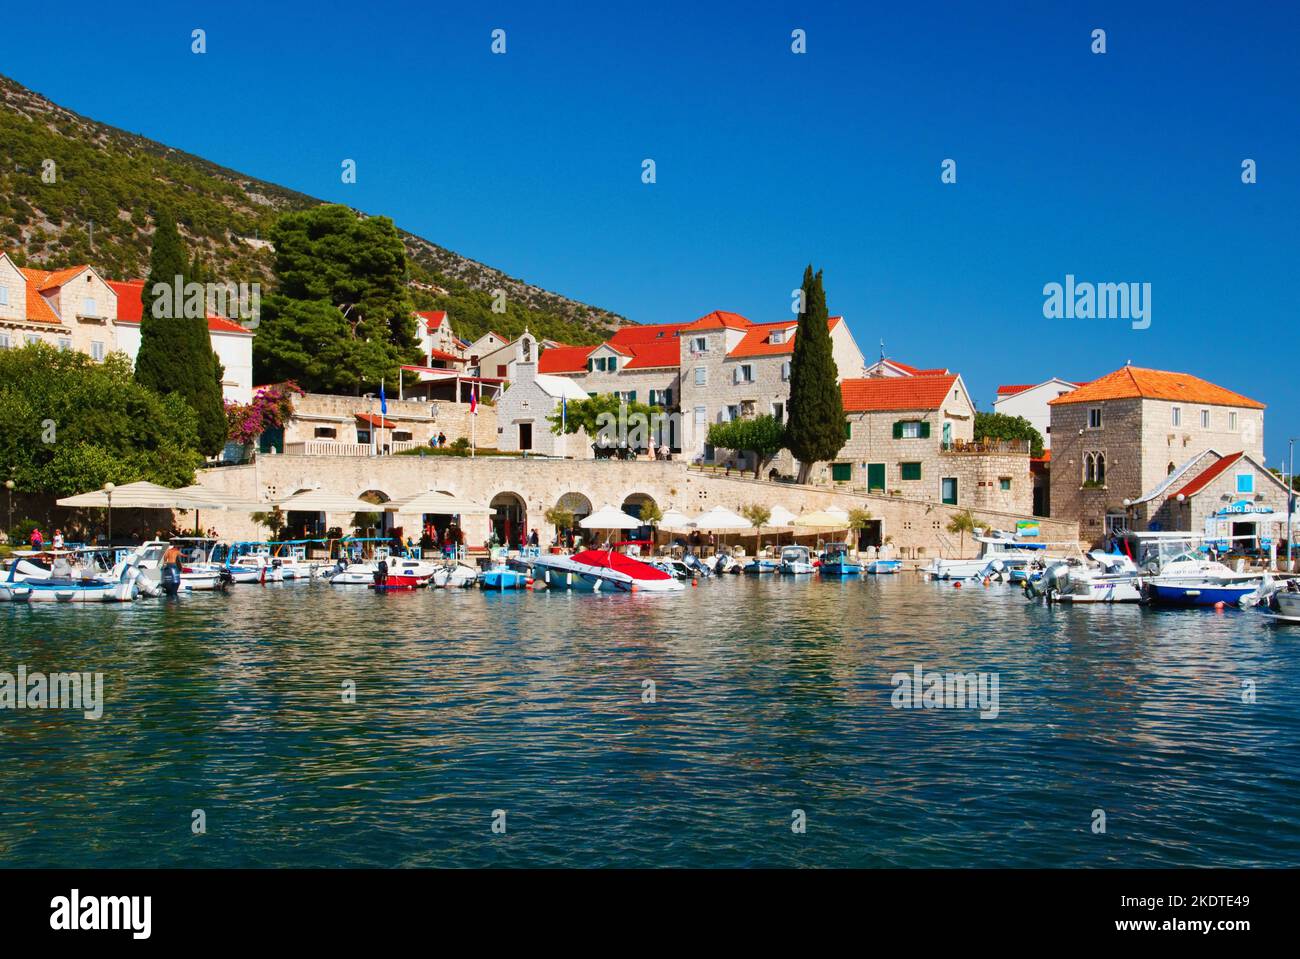 The town and port of Bol on the island of Brac in the Adriatic Sea in Croatia. Stock Photo